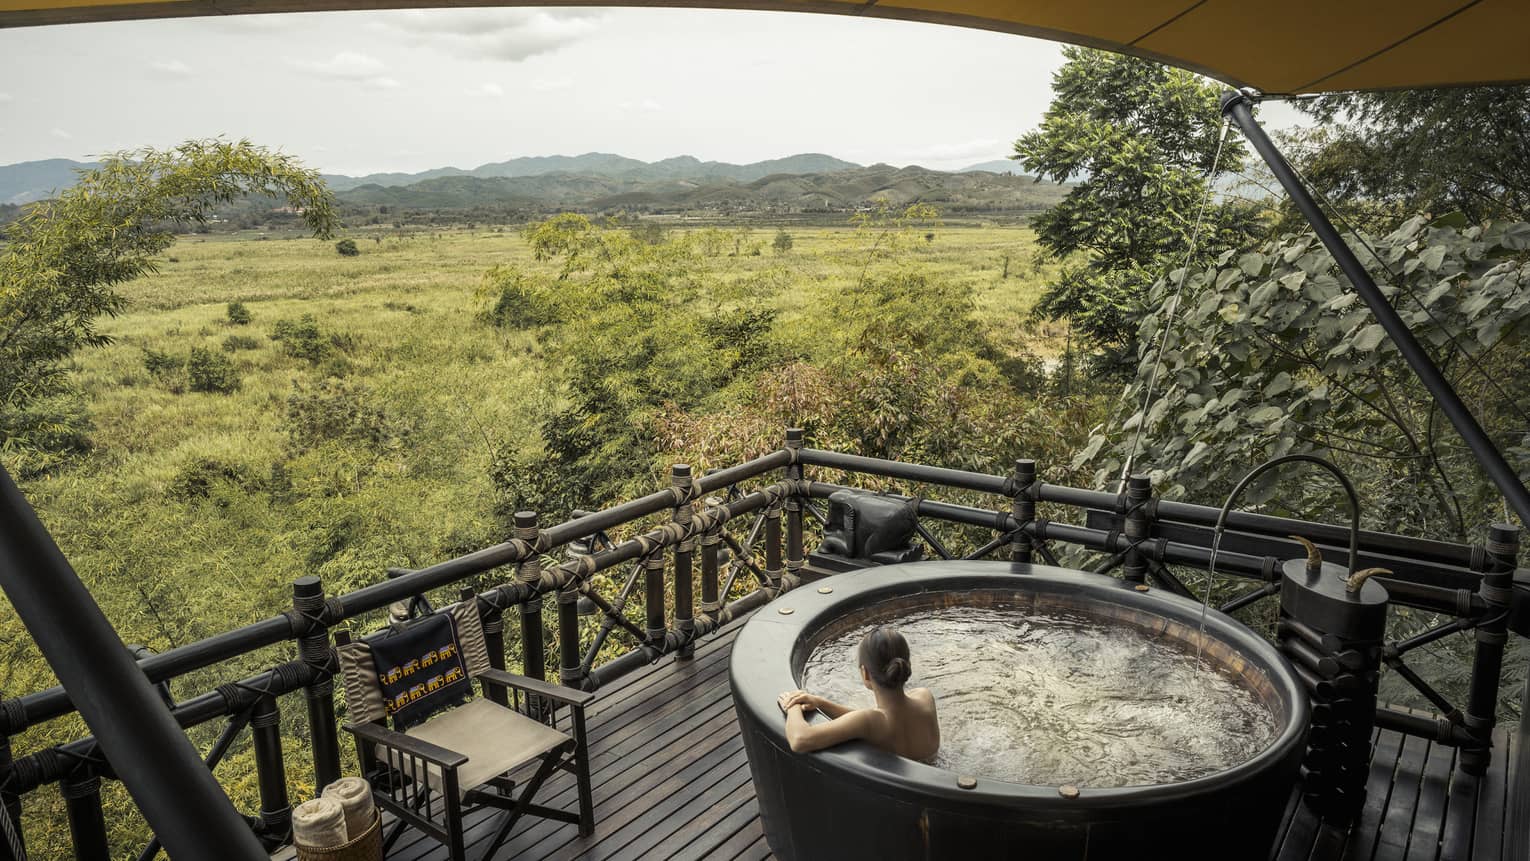 Woman wades in large round hot tub on wood deck overlooking green field, mountains